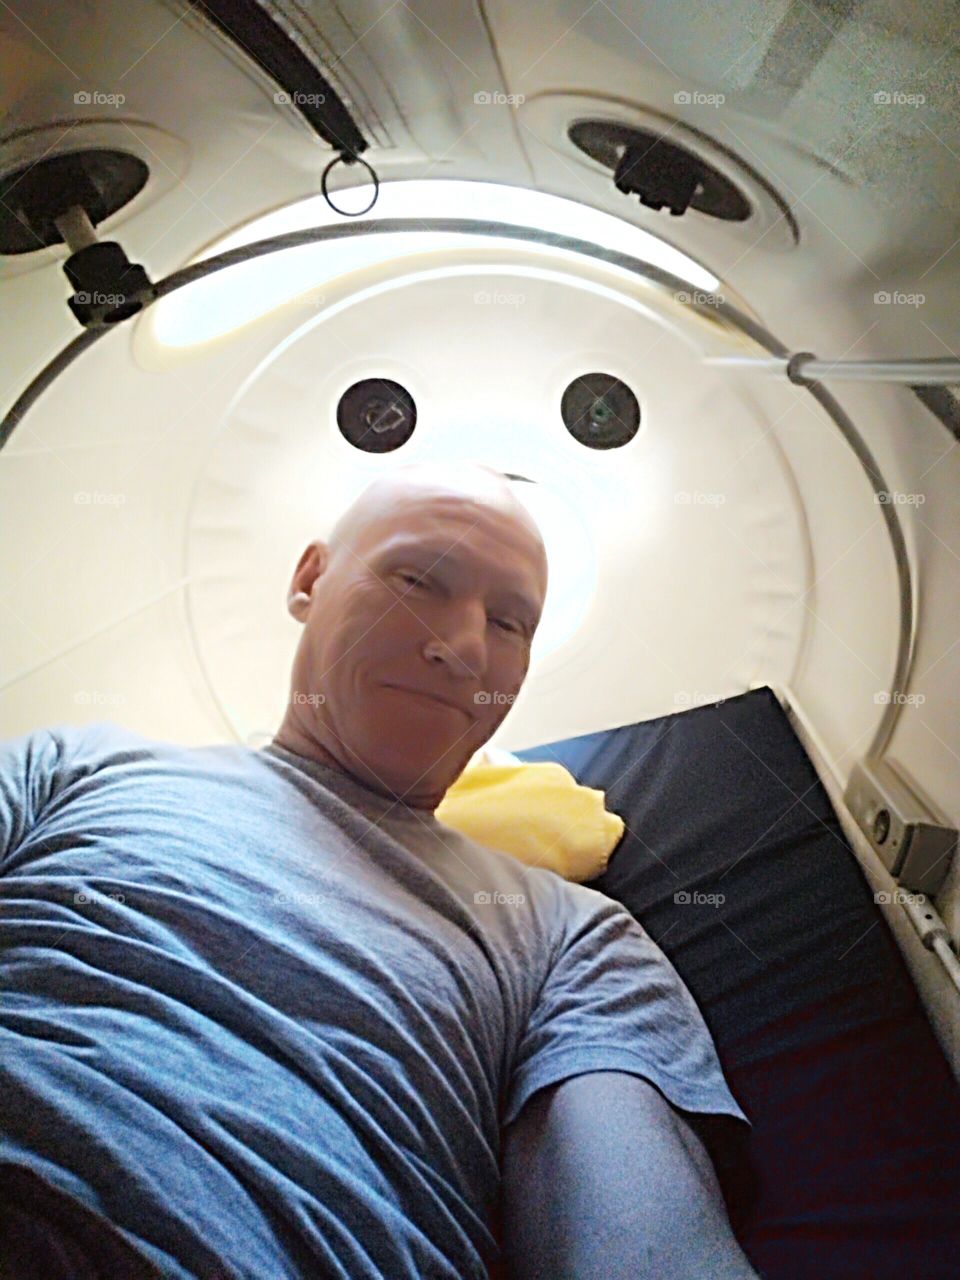 Hyperbaric Oxygen Therapy